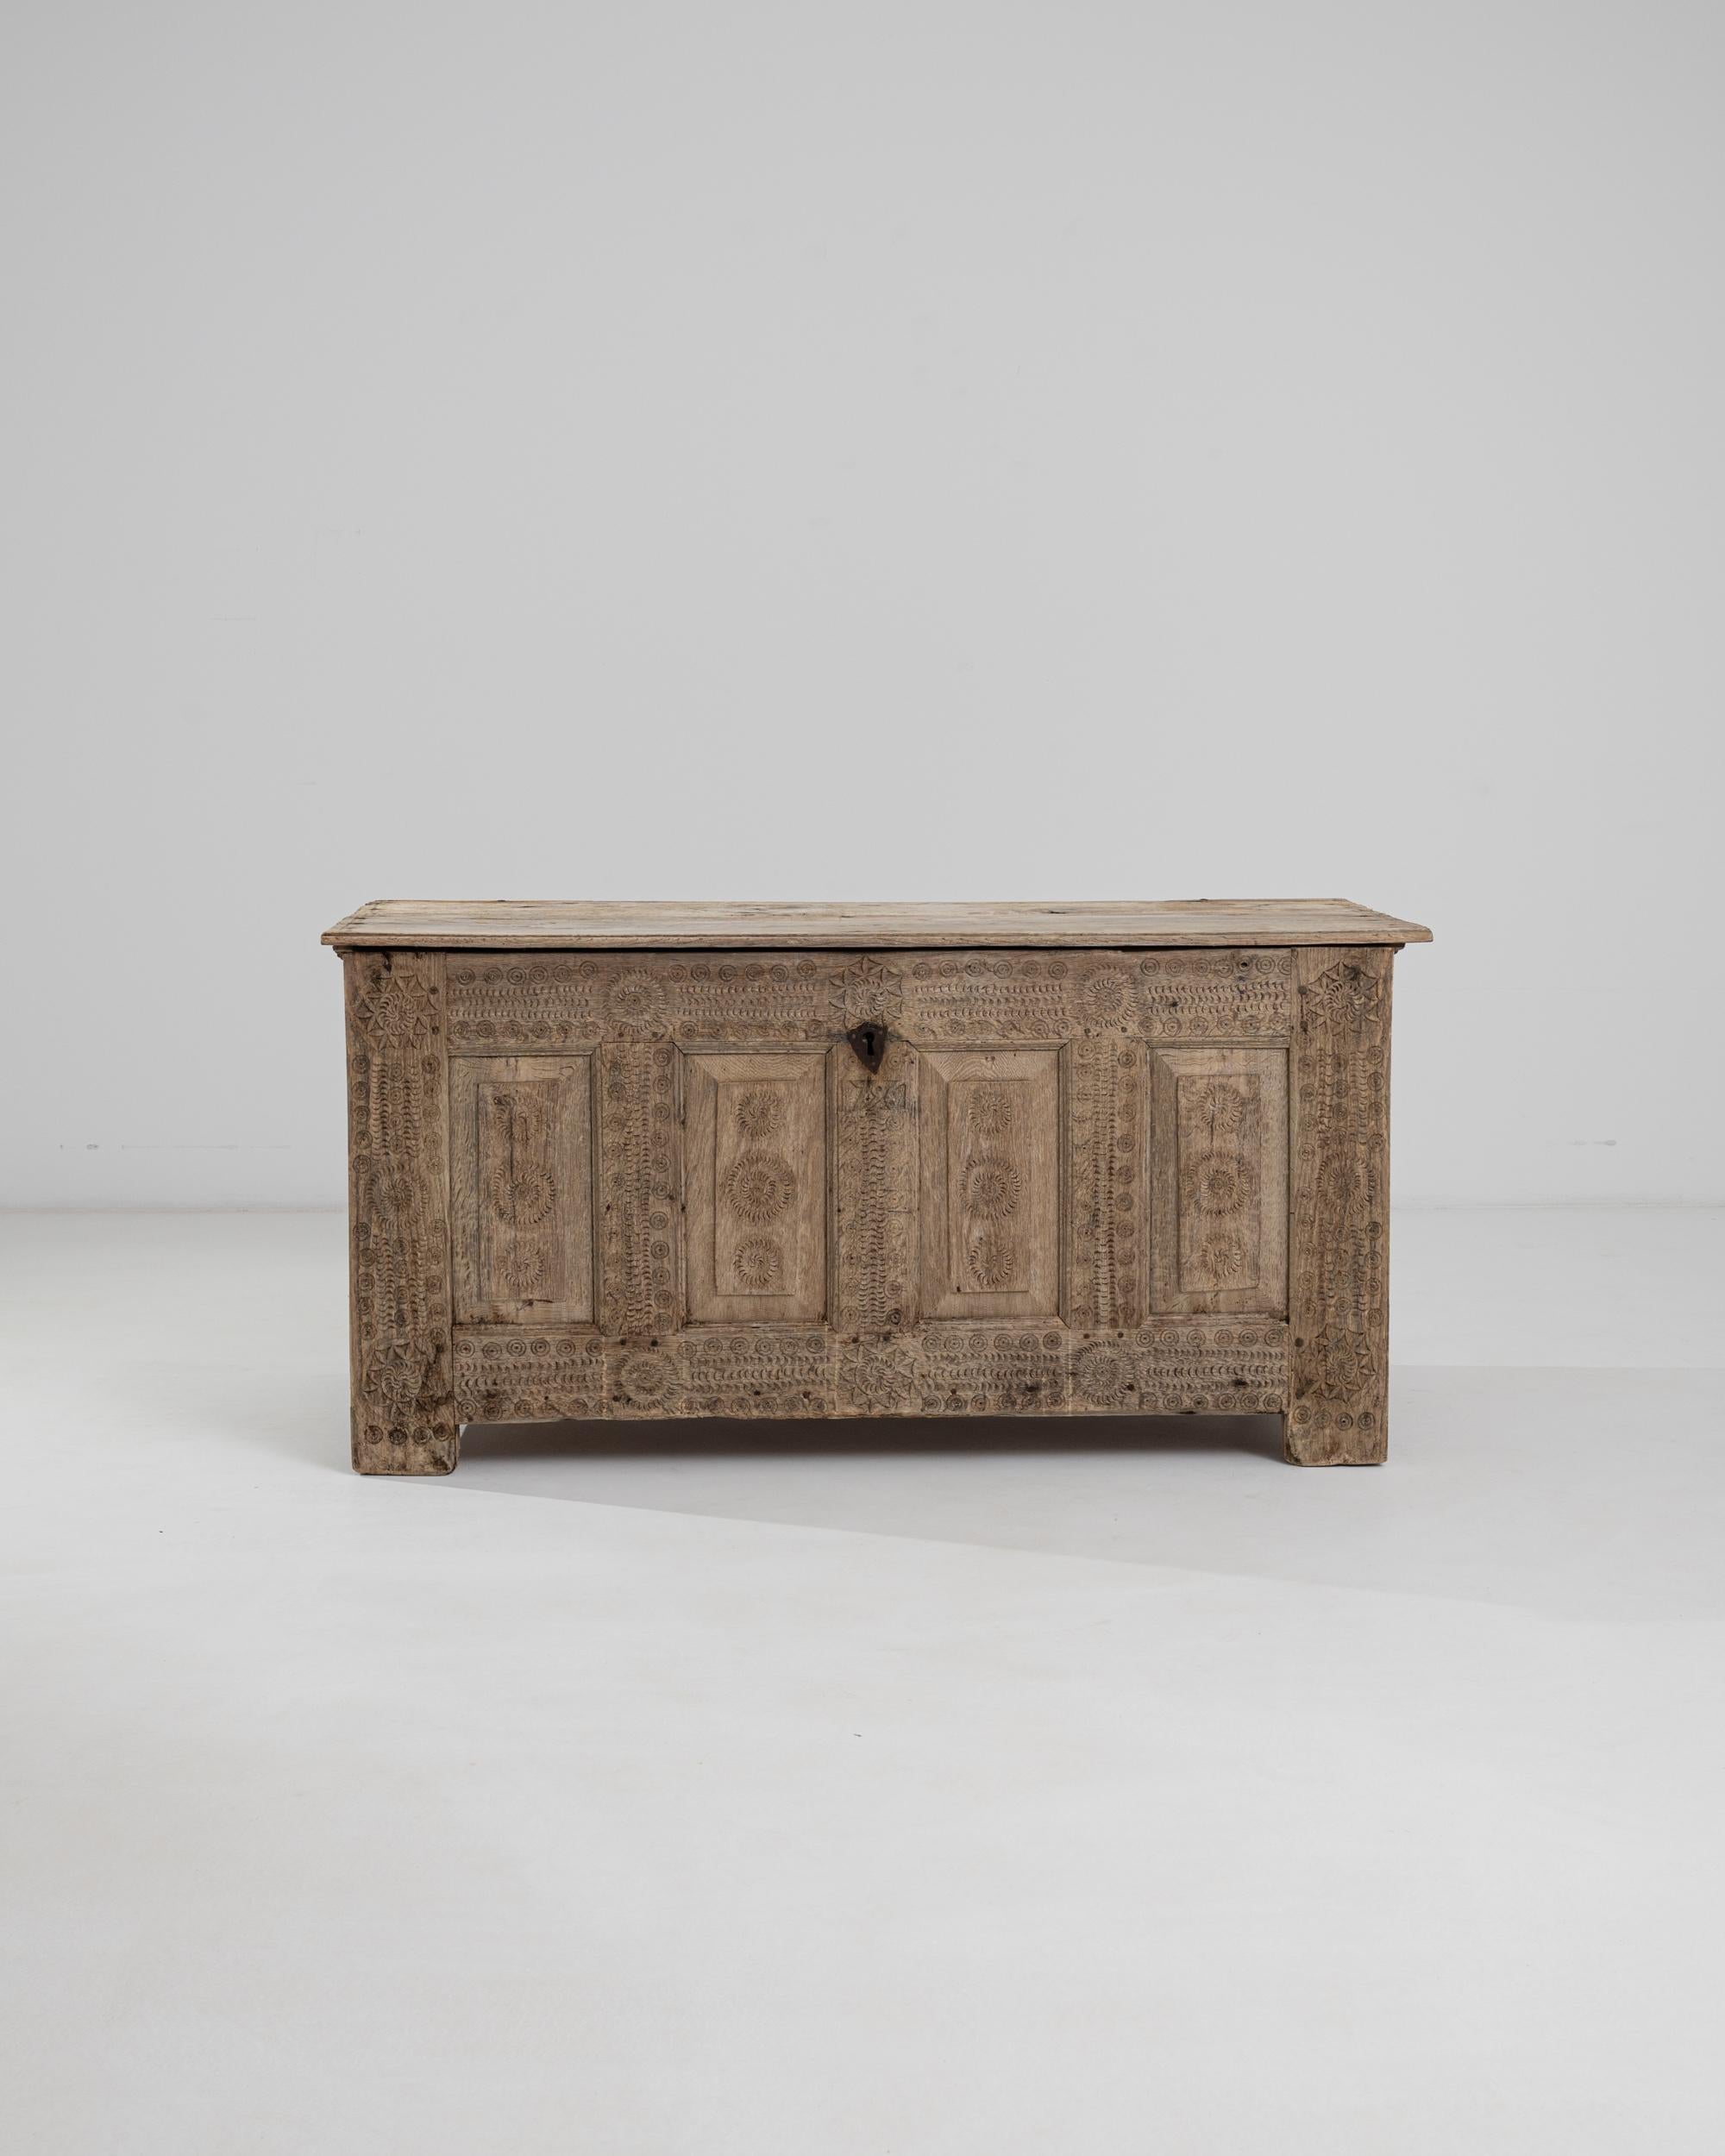 An antique trunk in natural oak, decorated with delicate carvings lend this piece a gothic demeanor. Built in France in the 1700s, the front panel is covered with rippling, geometric motifs of circles, sunbursts and crescent moons. They appear to